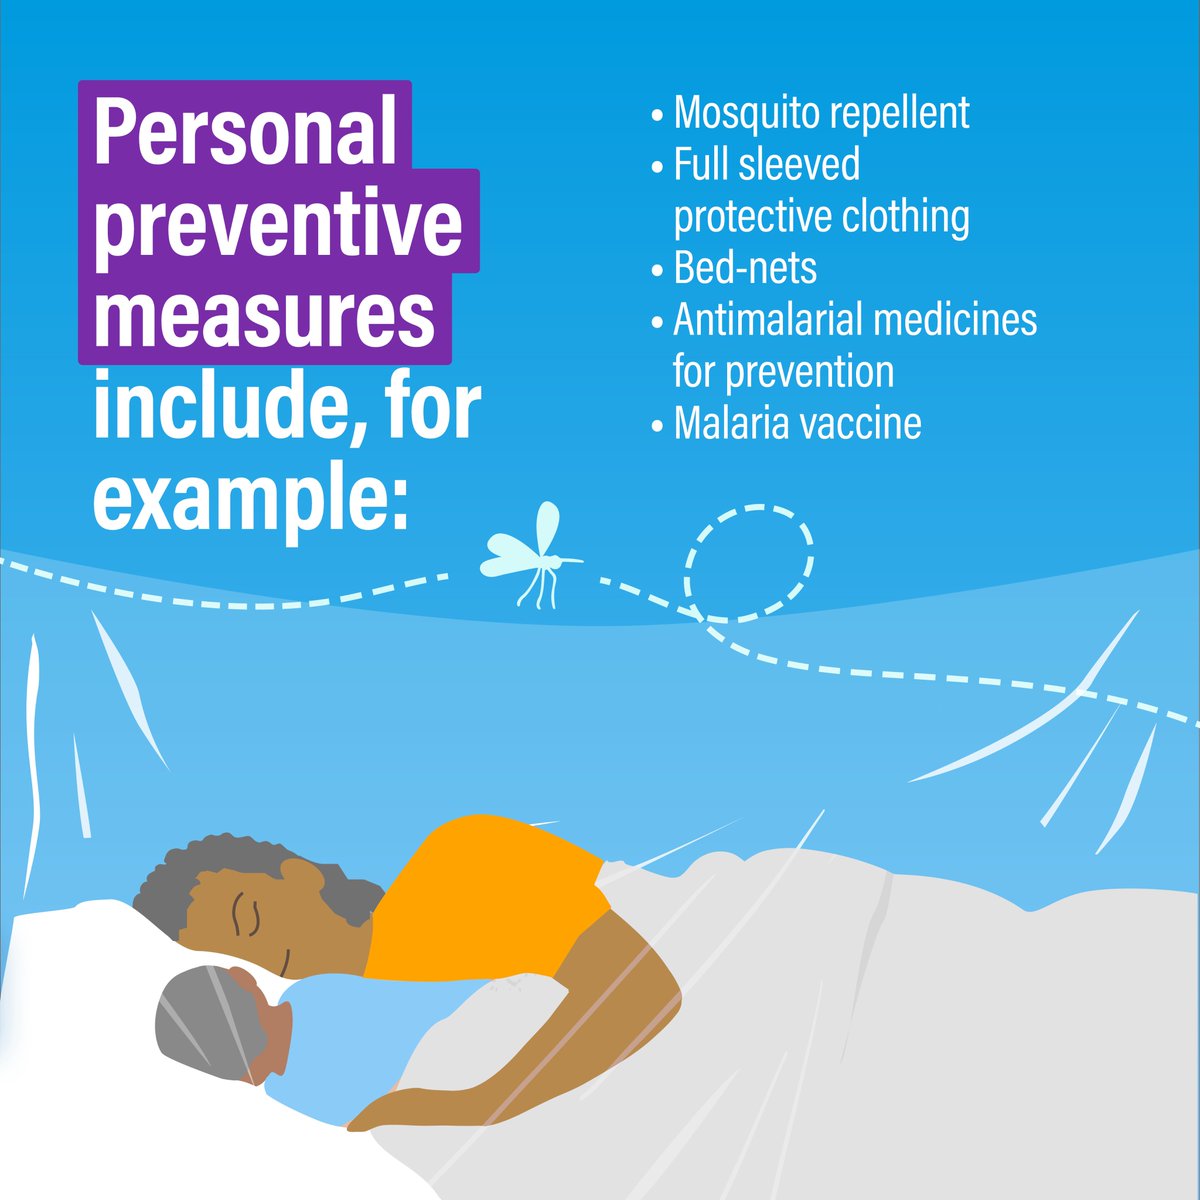 #Malaria is PREVENTABLE. Lower the risk of getting malaria through: ✅ mosquito nets ✅ mosquito repellents ✅ antimalarial medicines ✅ malaria vaccine And don't forget to wear protective clothing. Learn more 👉bit.ly/44bRXGf #WorldMalariaDay